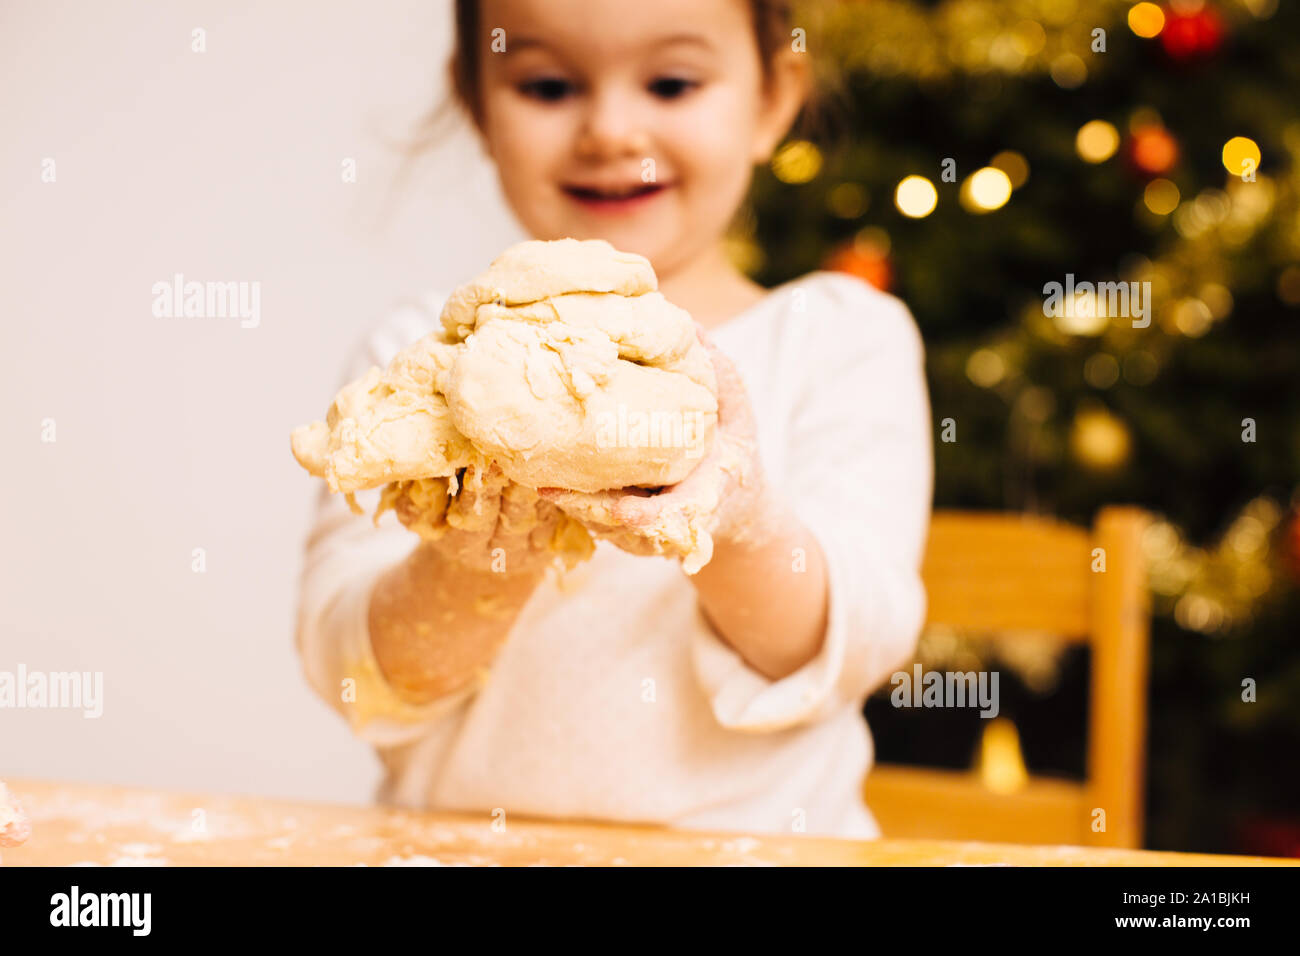 Toddler girl holding dough in front of christmas tree Stock Photo